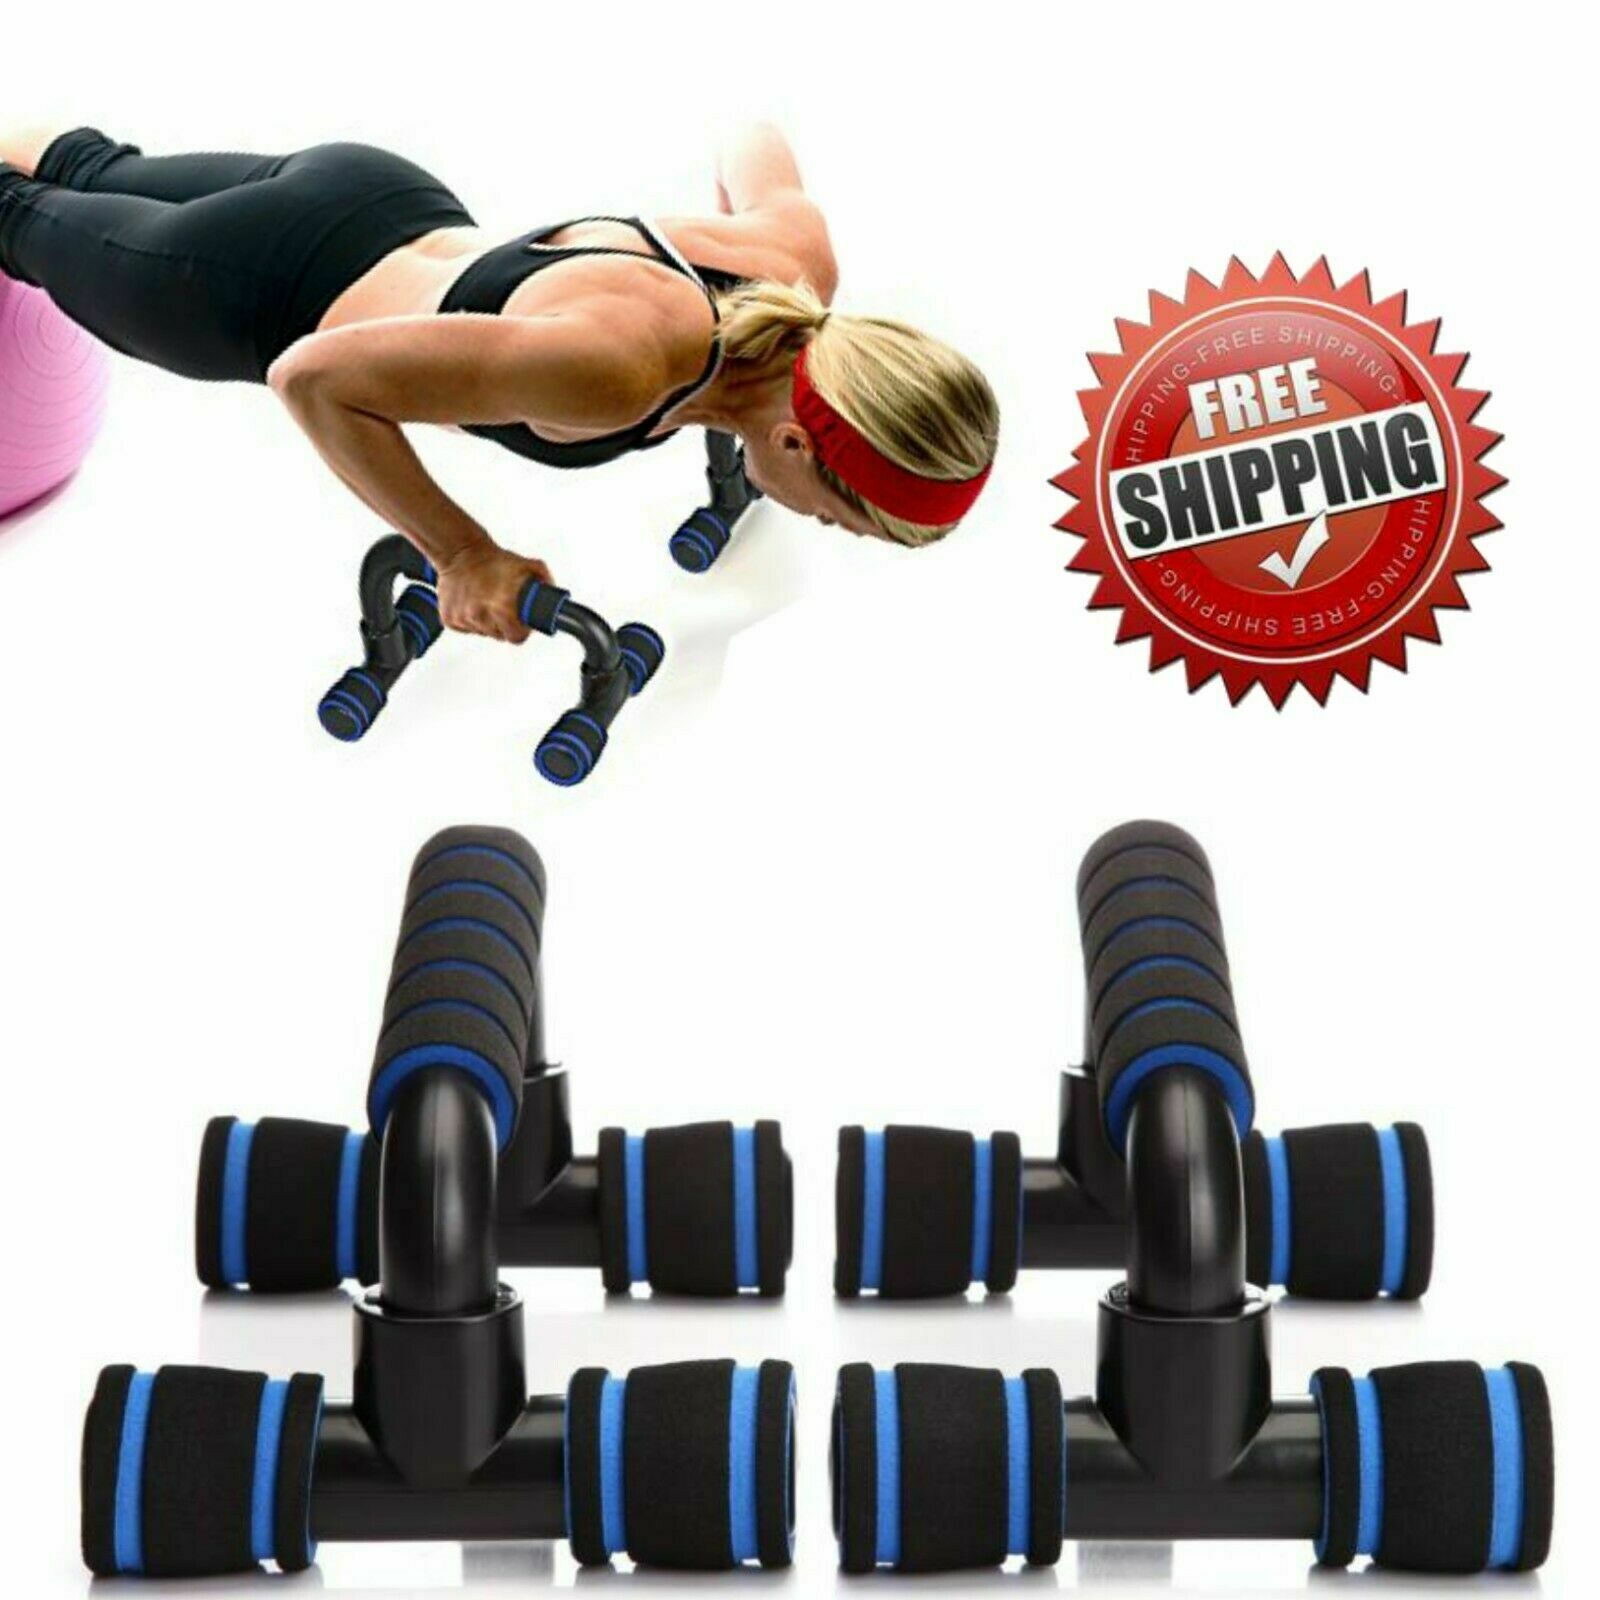 Body Sculptured Push Up Bars Press Handles Stands Exercise Grips Fitness Workout